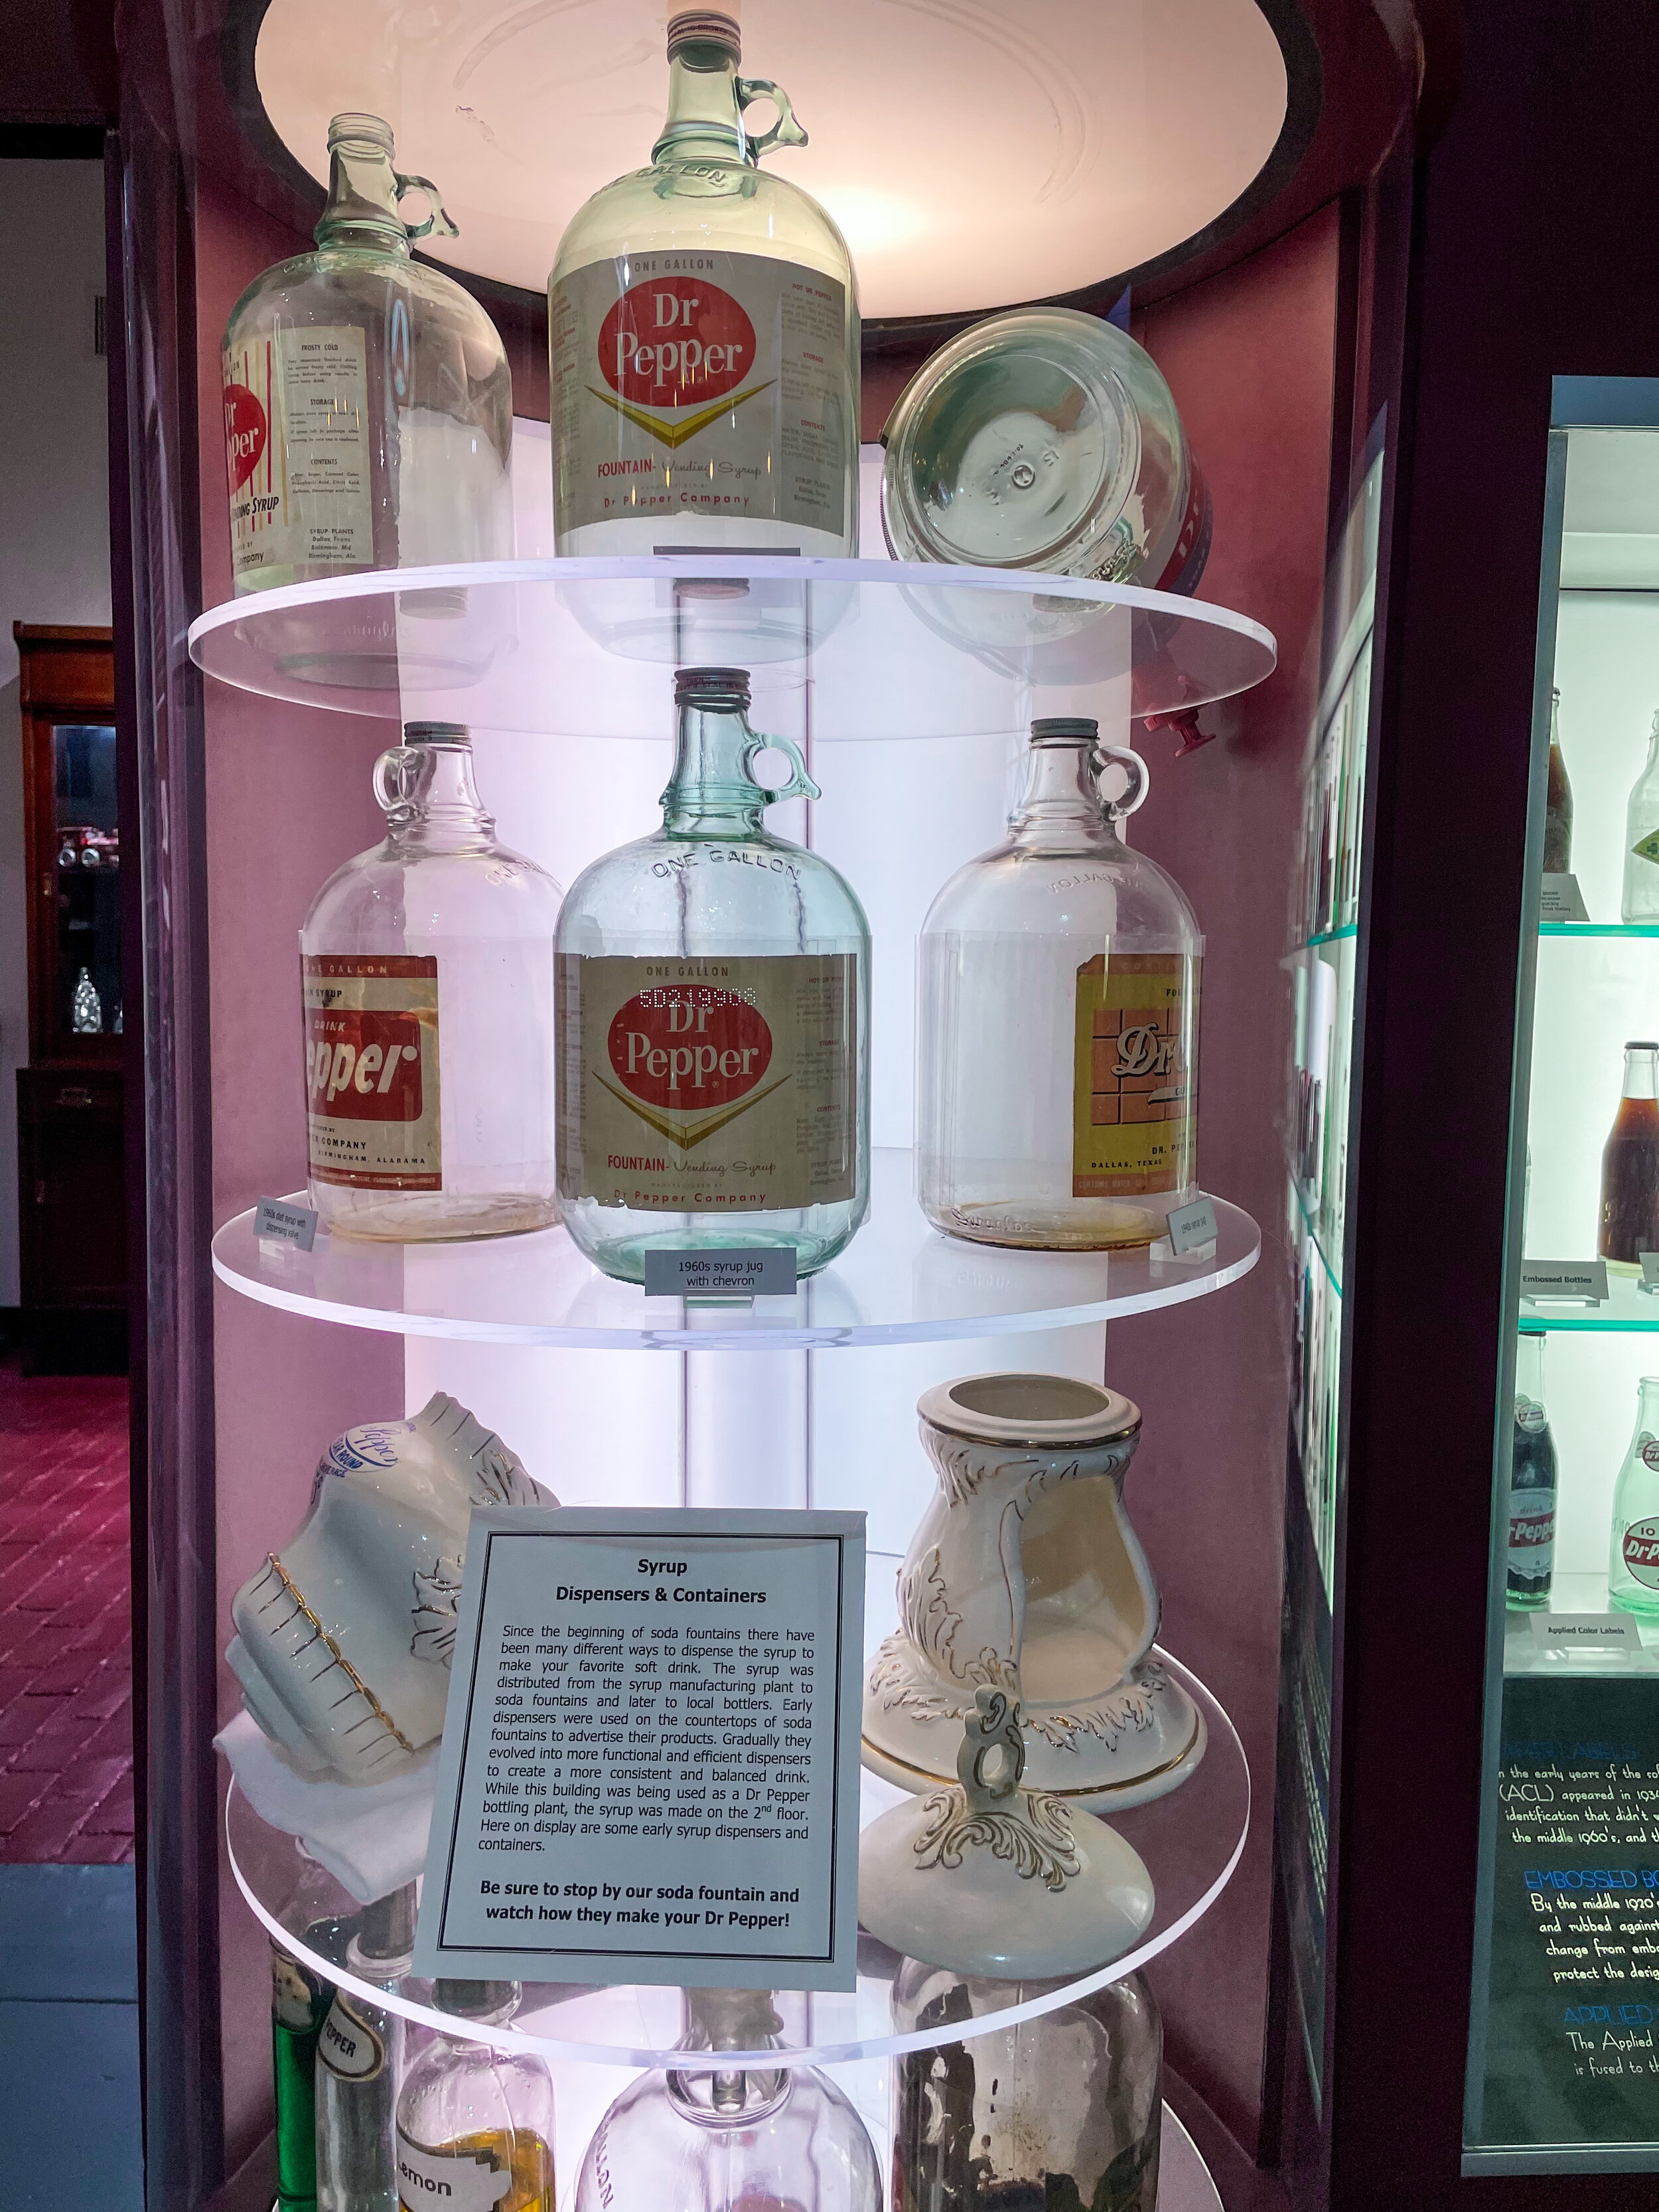 dr. pepper display at Dr. Pepper Museum Waco, Texas